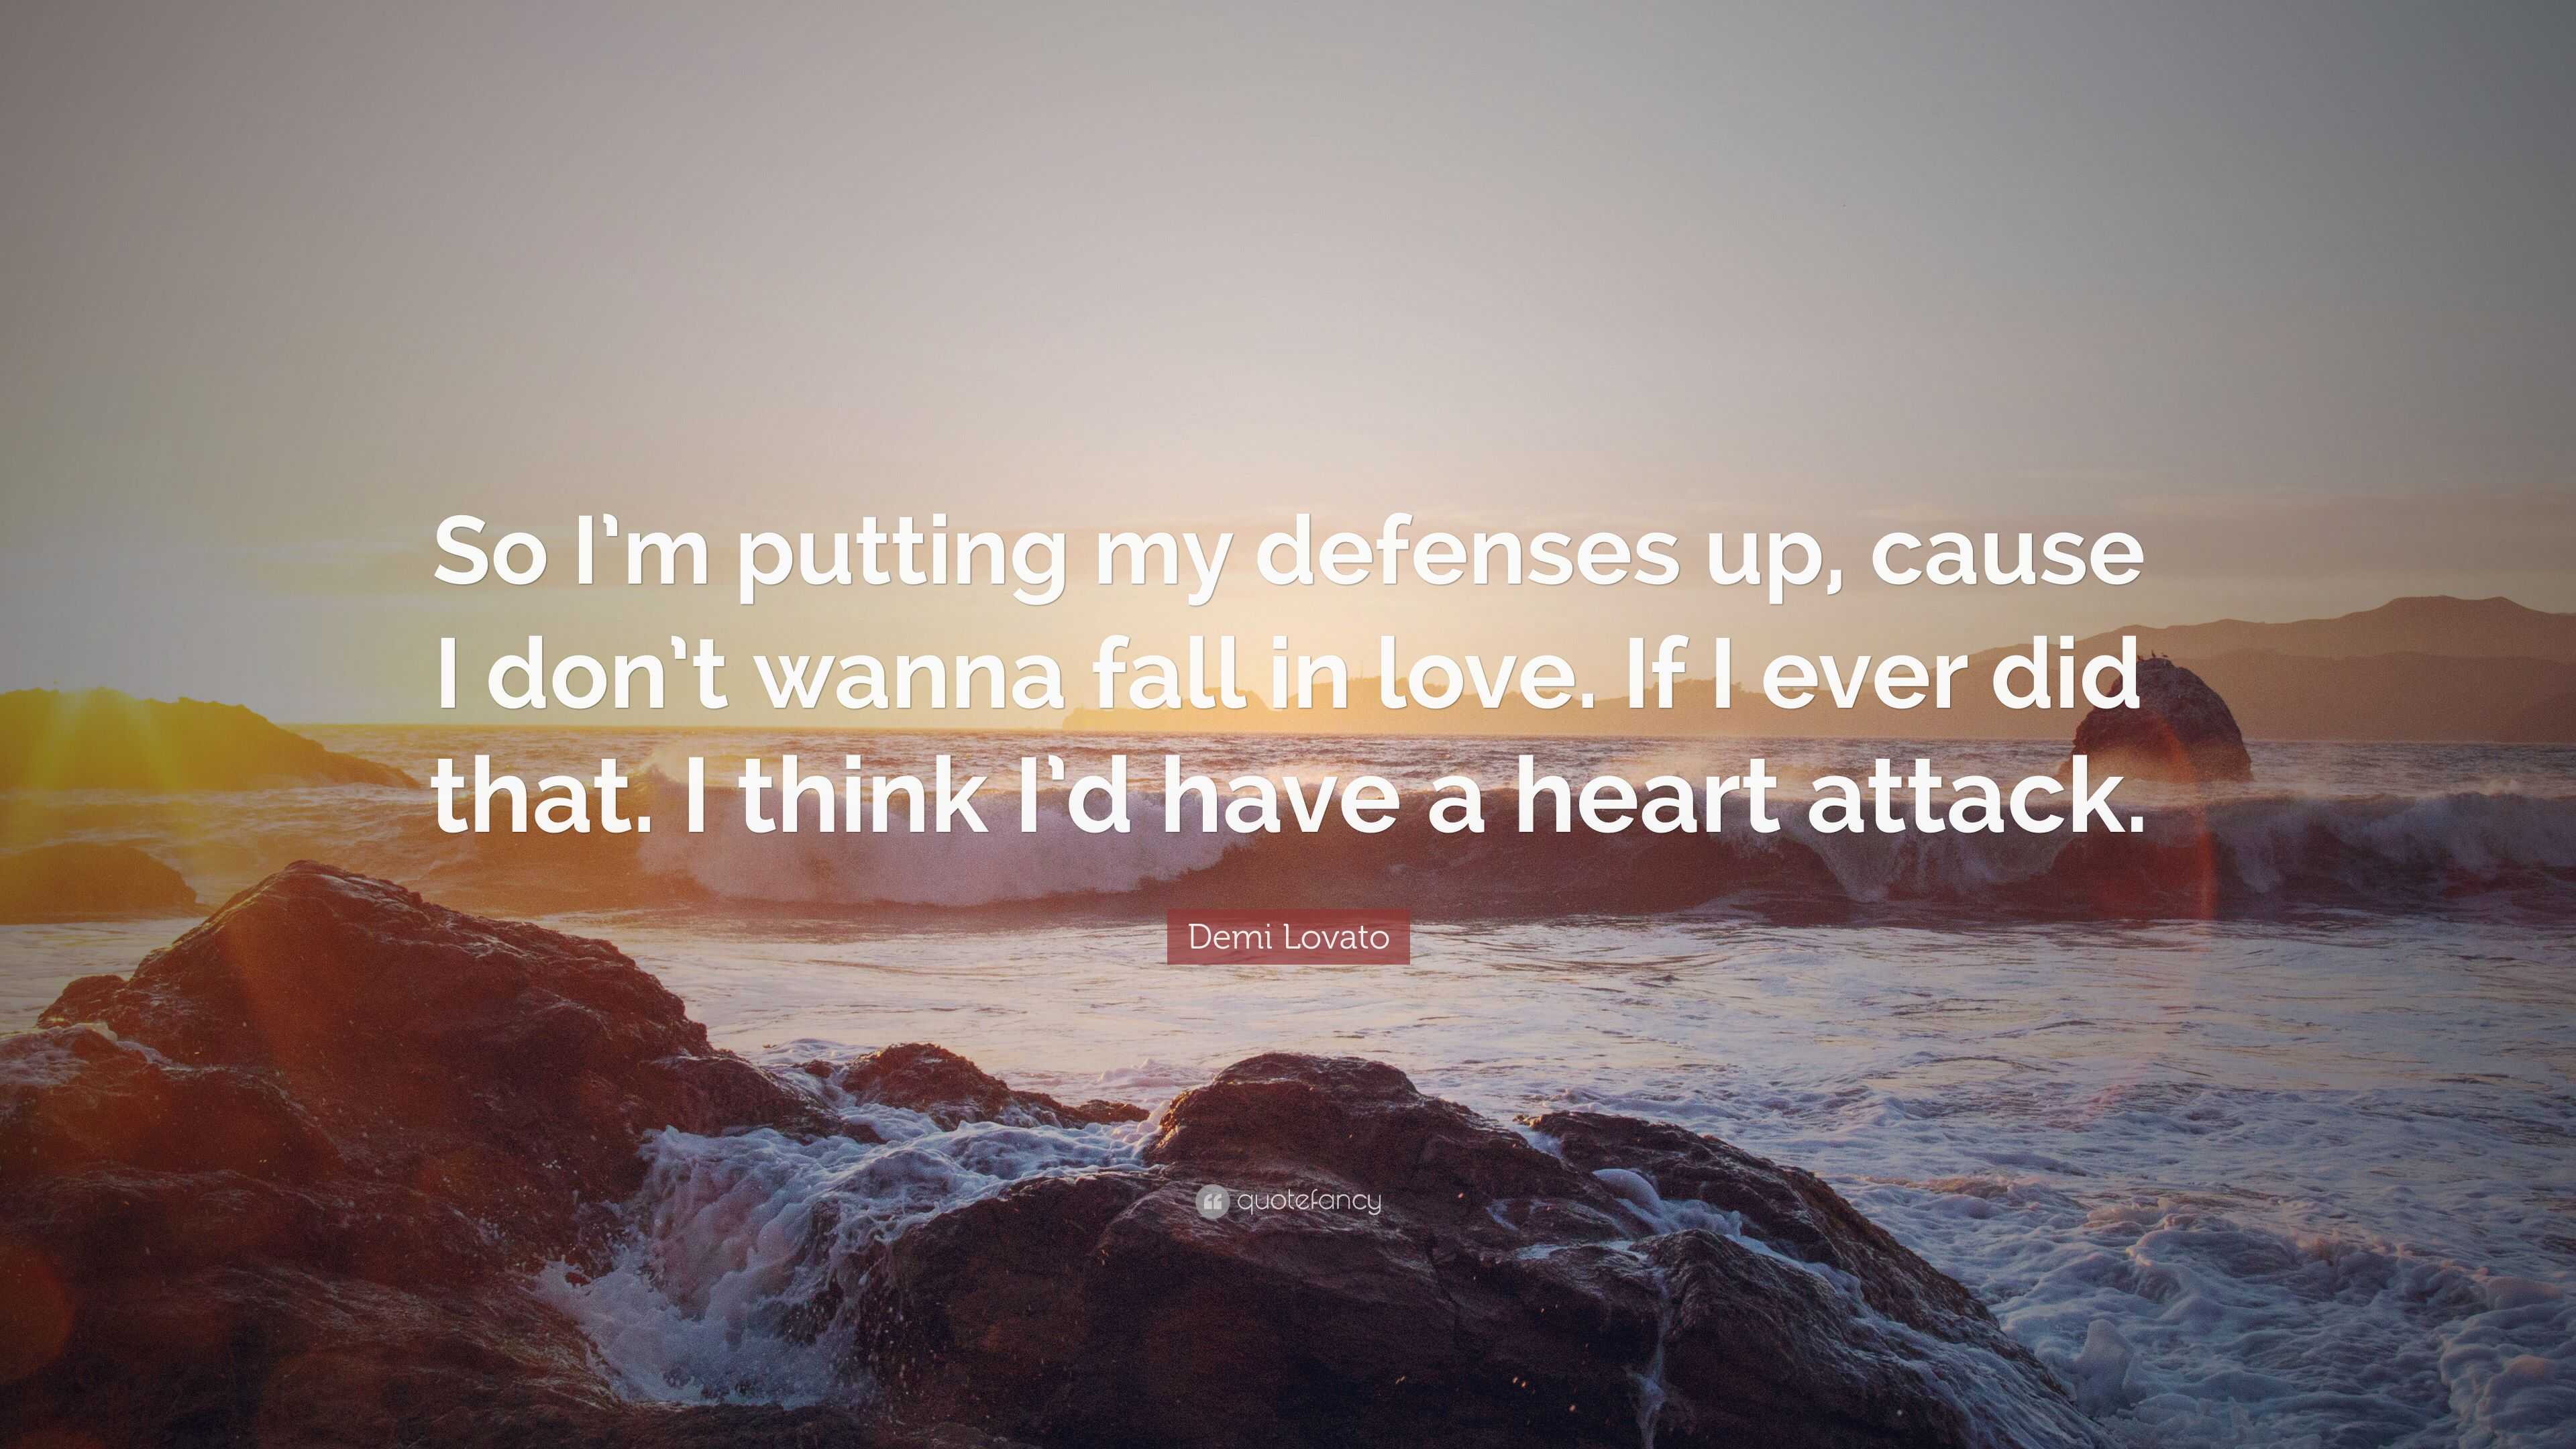 Demi Lovato Quote “So I m putting my defenses up cause I